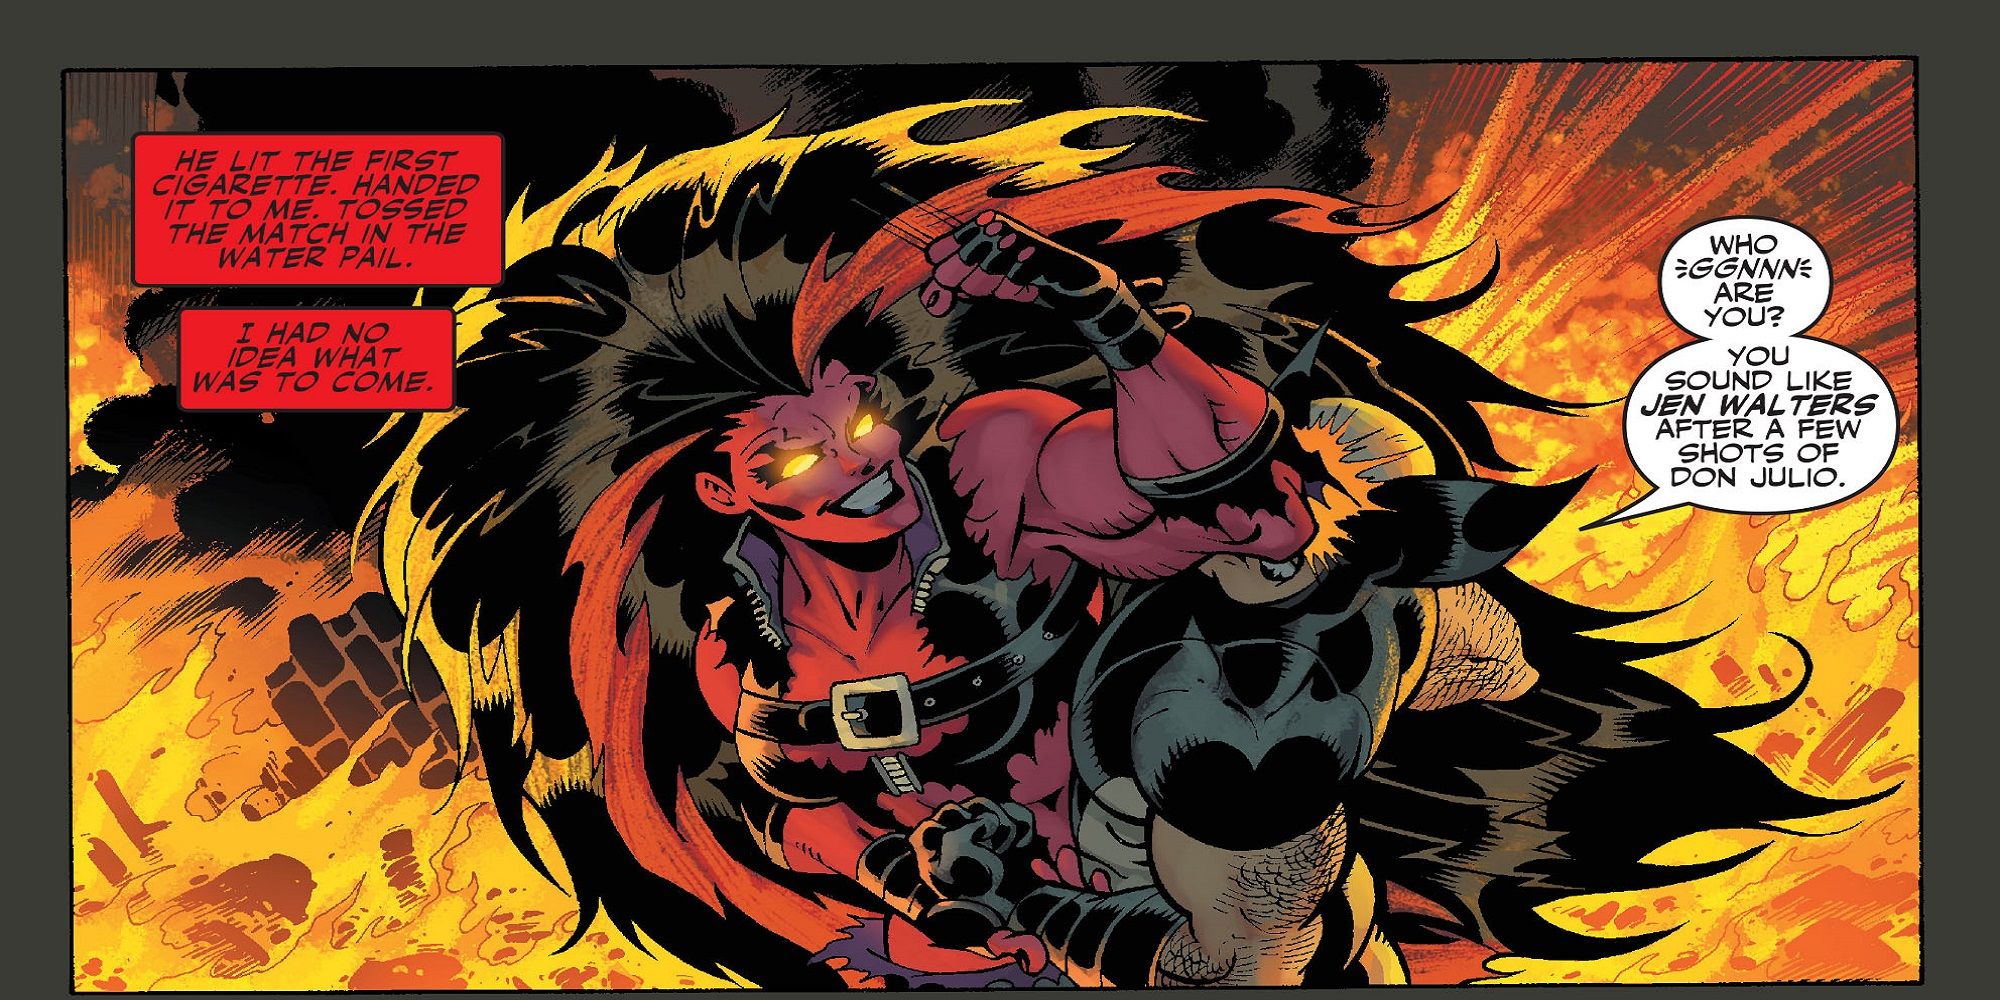 An image of comic art depicting Red She-Hulk fighting Wolverine and X-Force